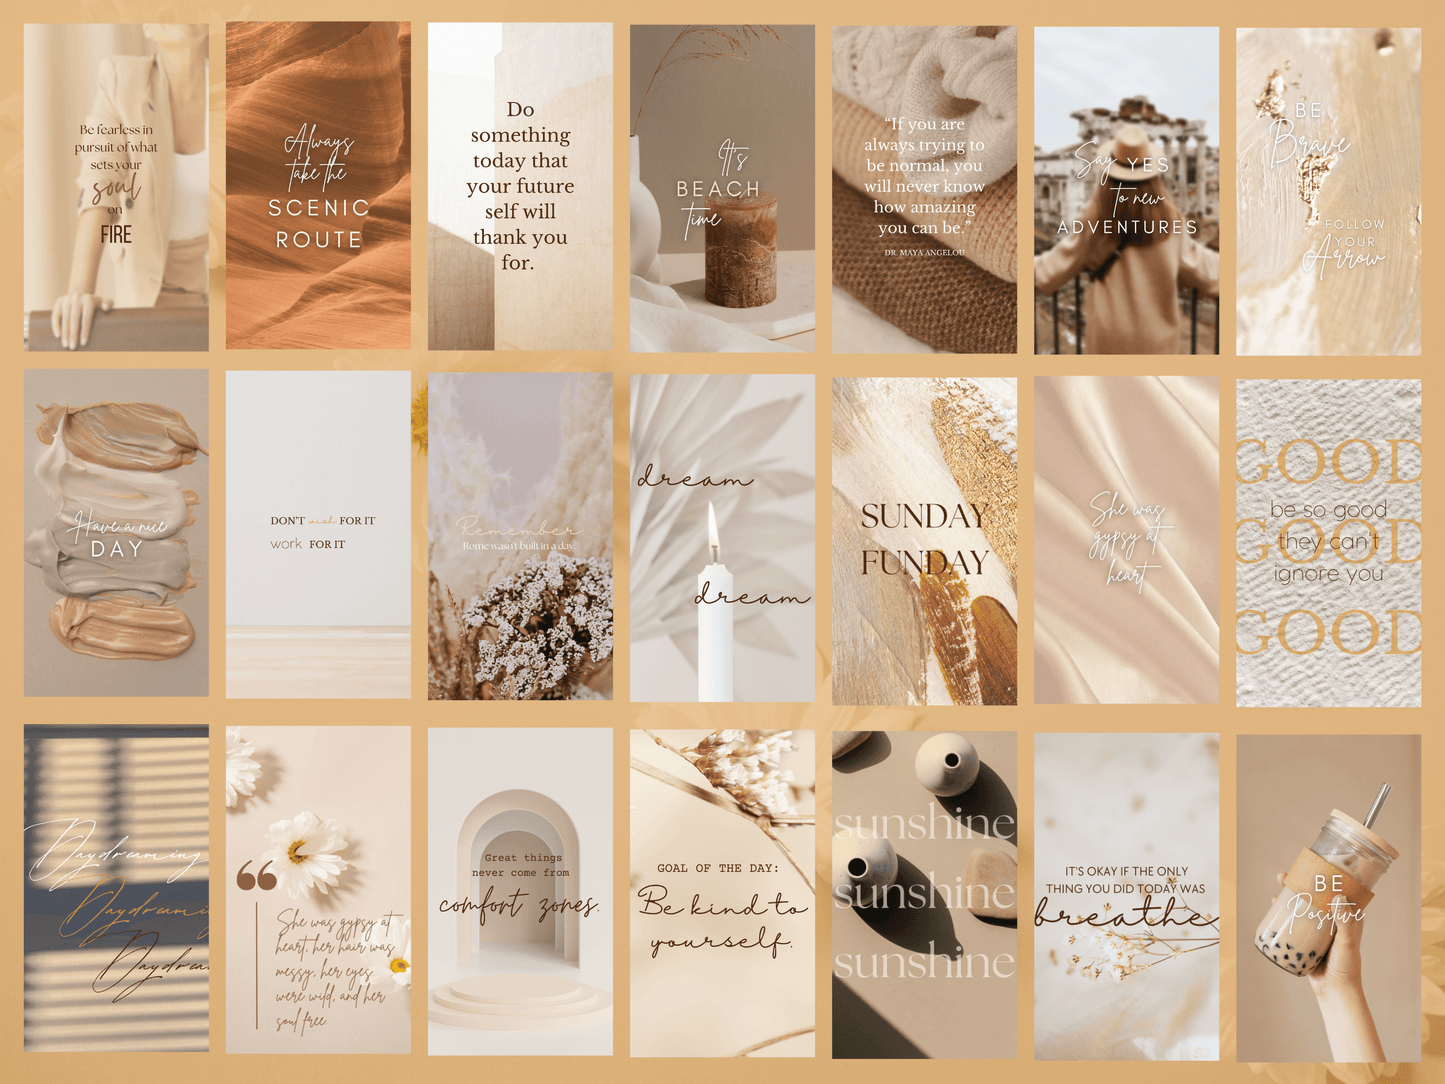 Instagram motivational quote stories templates with aesthetic font and boho style and colors perfect for content creators and business owners. It's all editable in Canva.